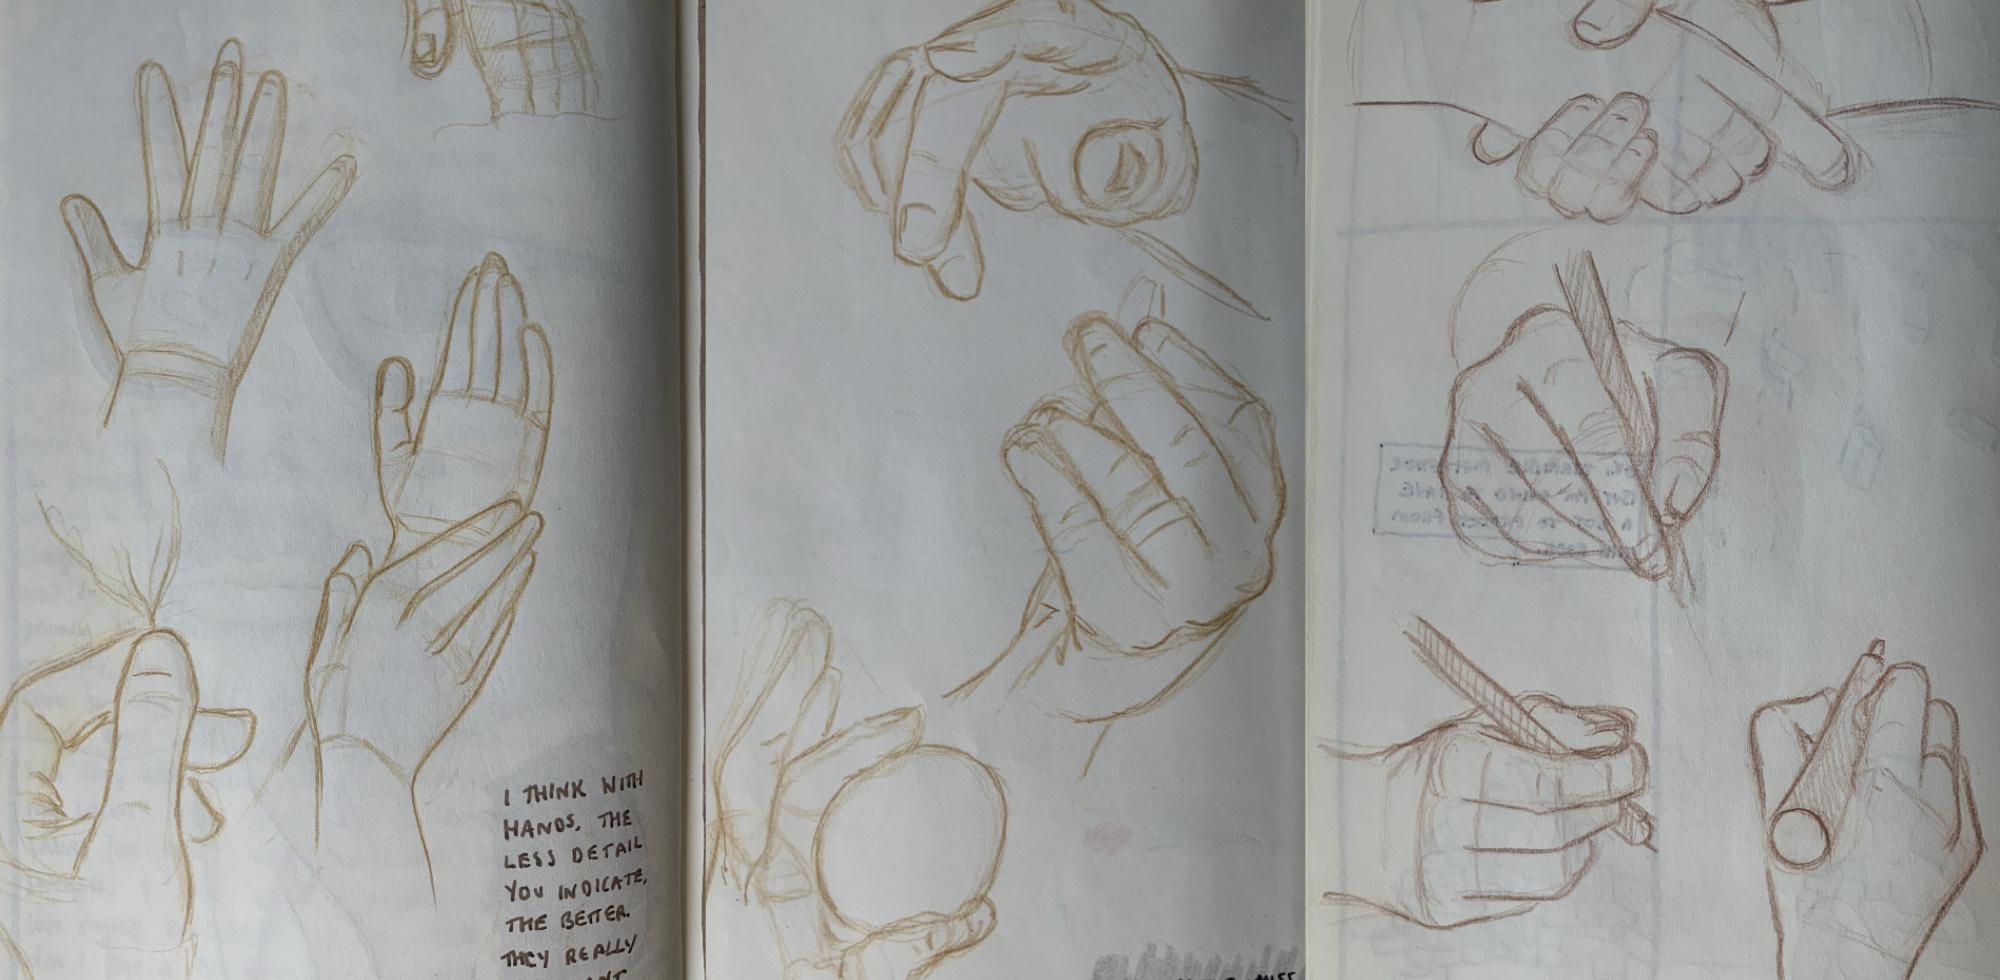 Some pencil sketches of hands by Adam Westbrook